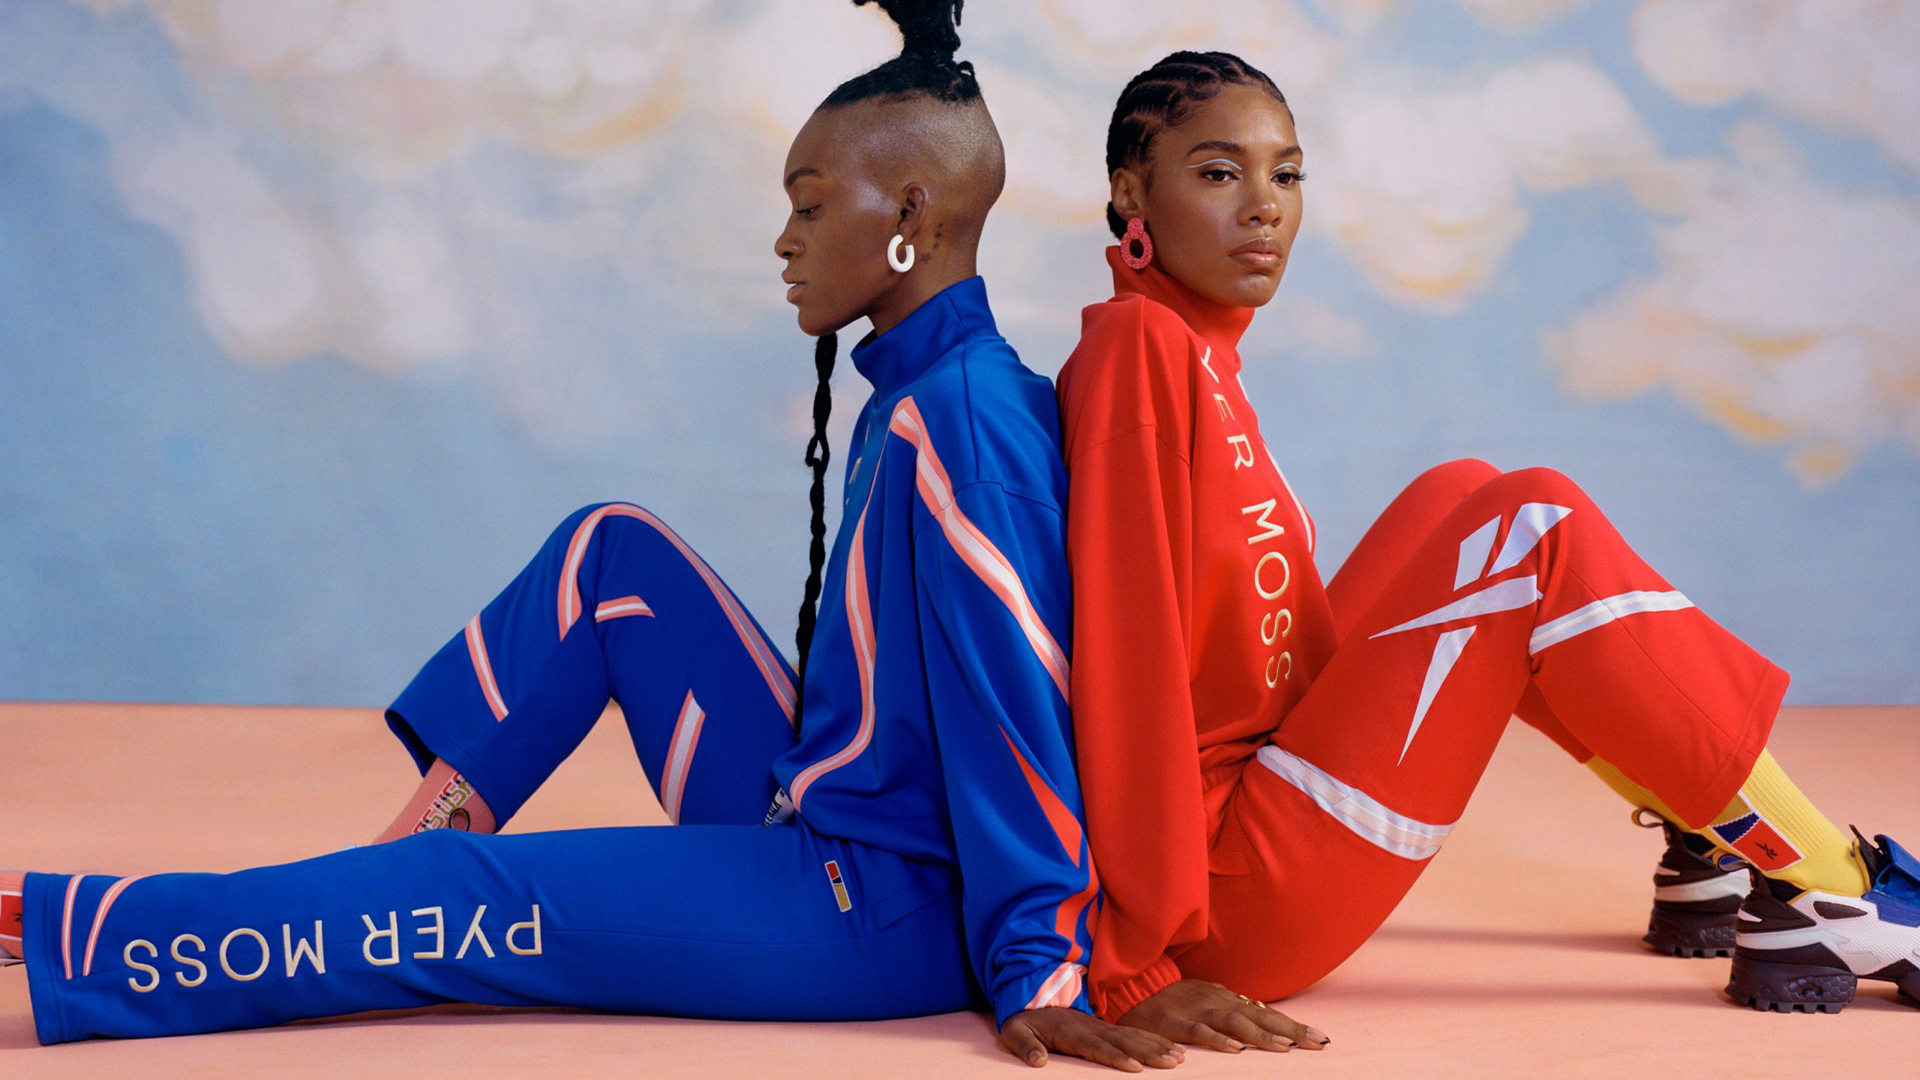 Reebok's Global Creative Director to leave role - TheIndustry.fashion